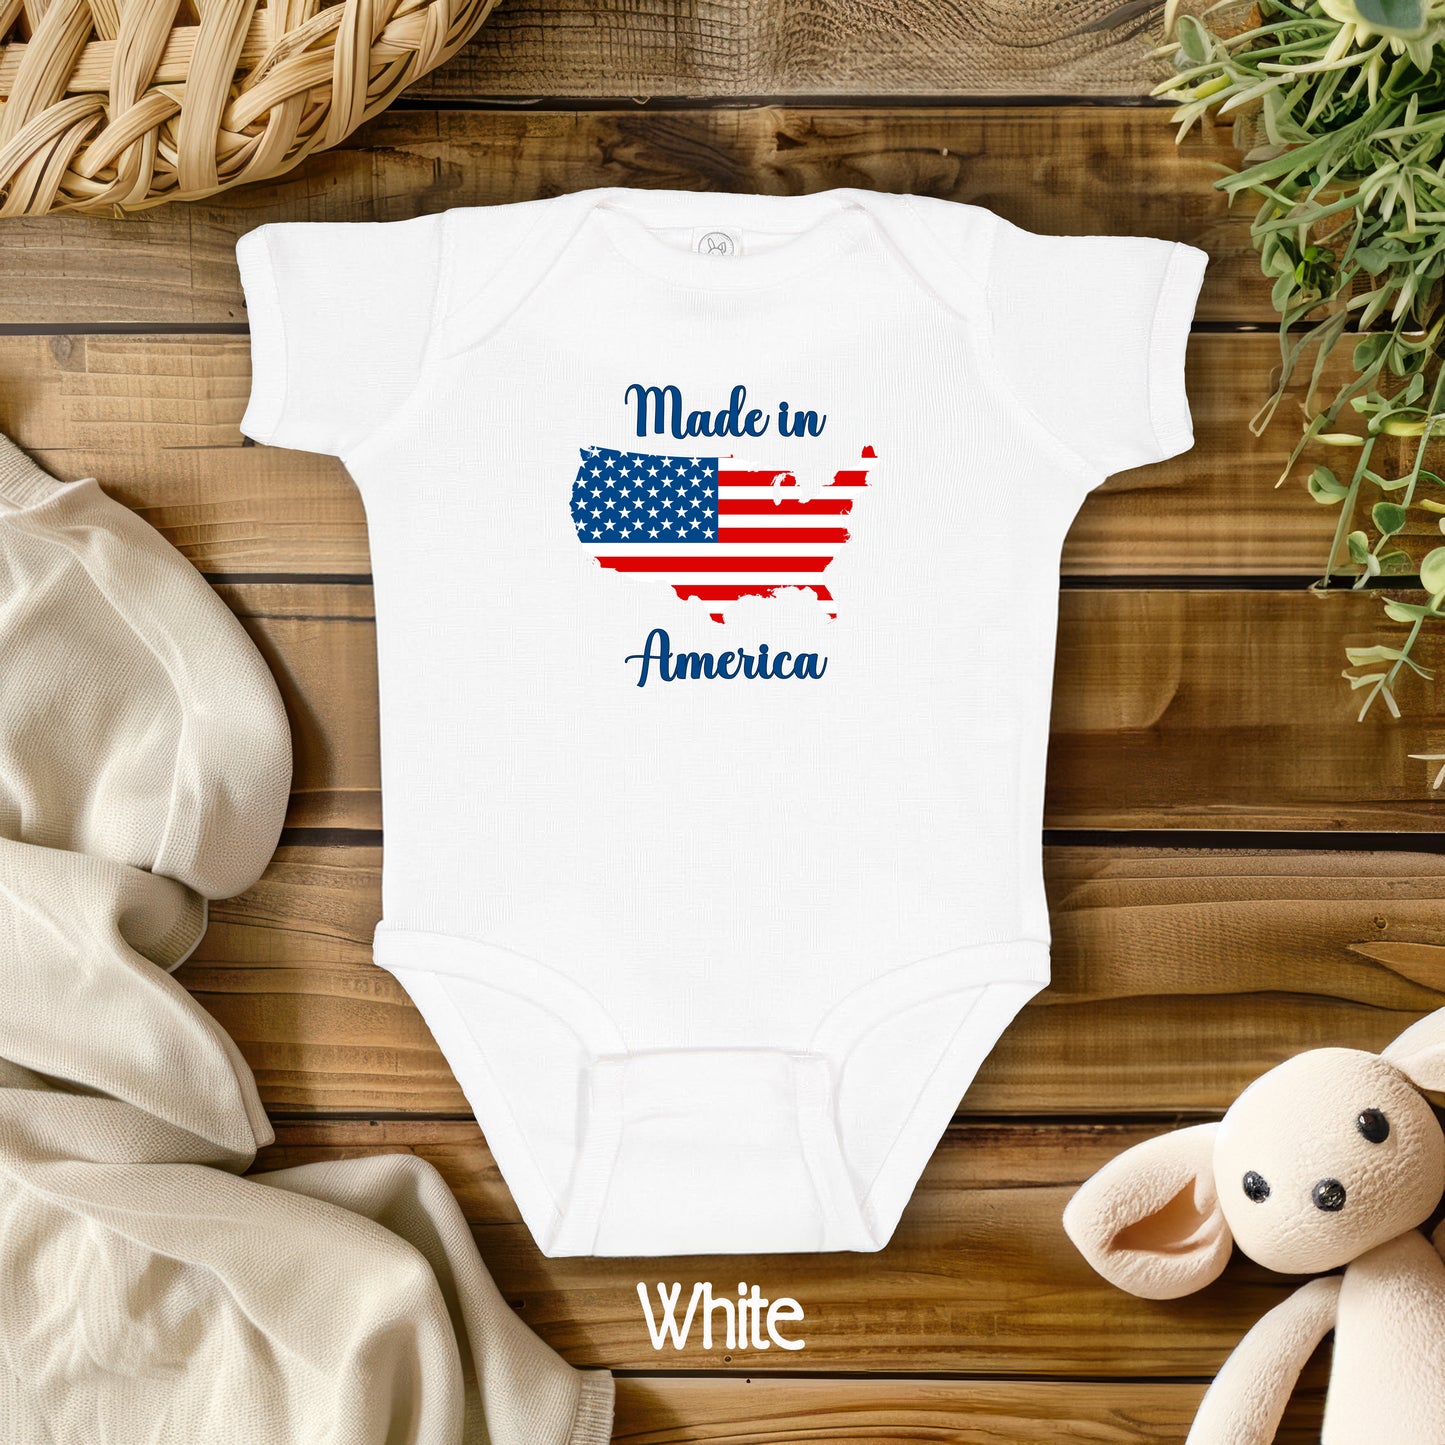 "Made in America" One Piece Bodysuit